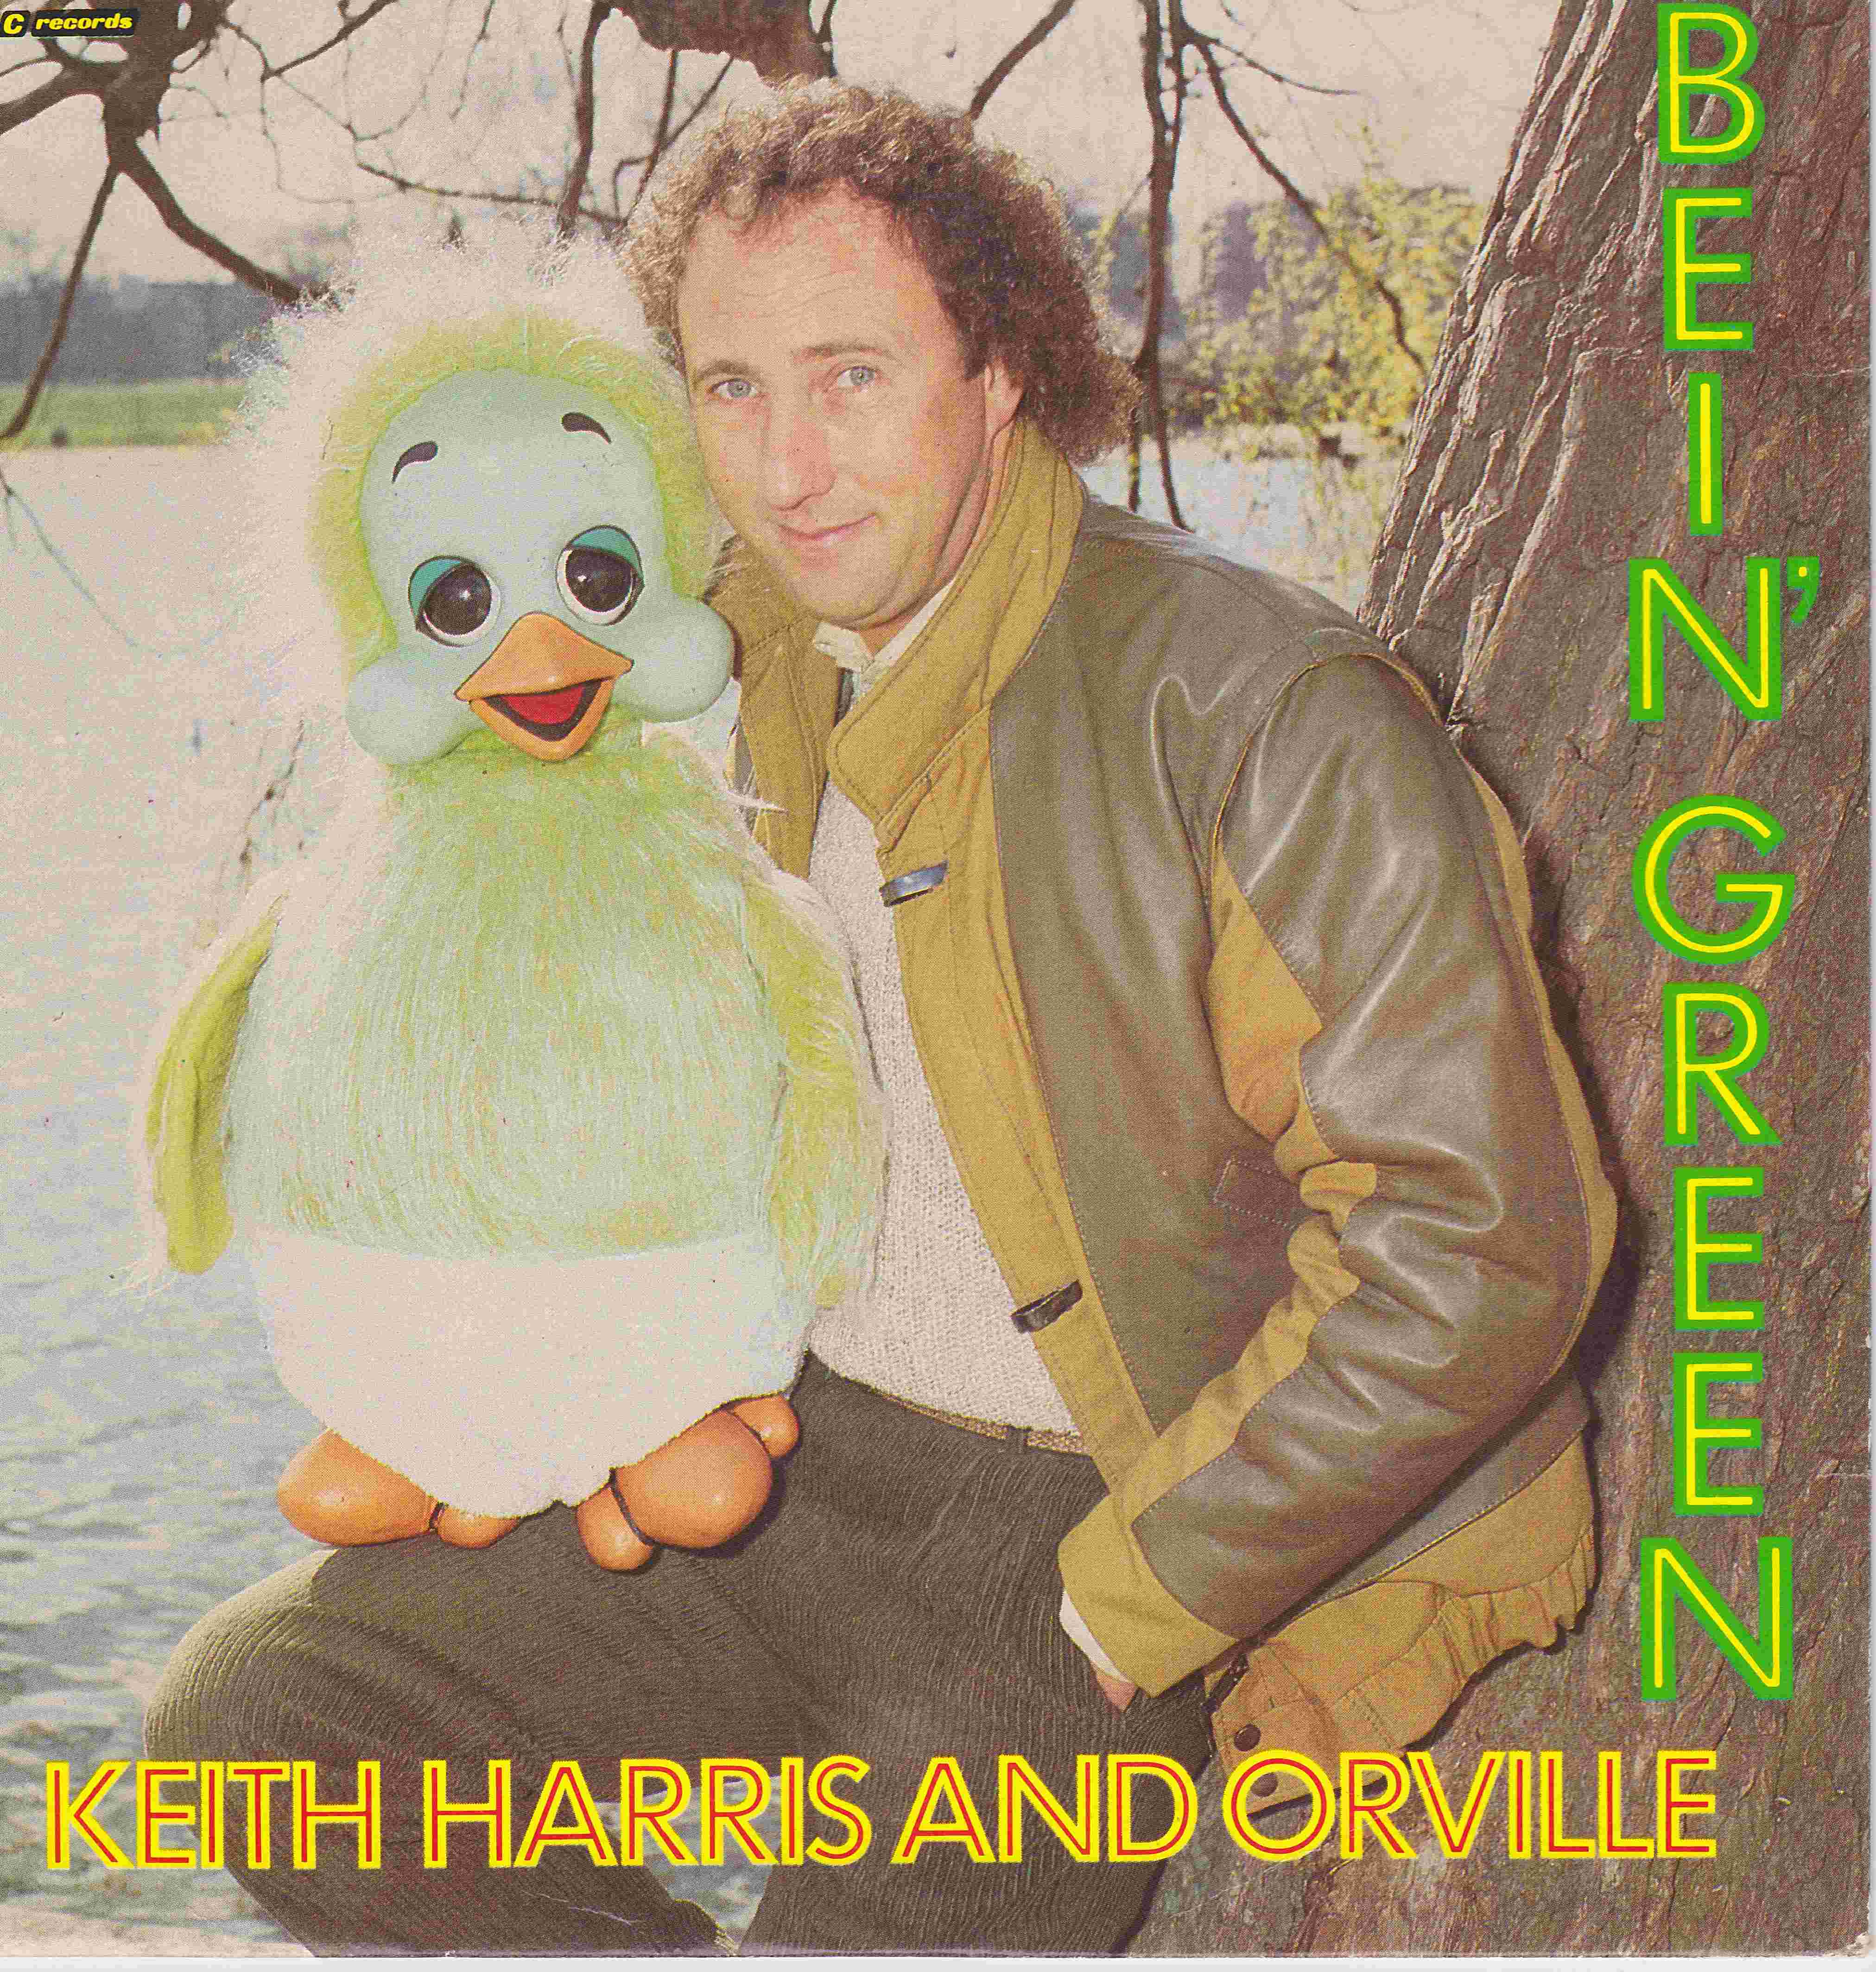 Picture of RESL 145 Bein' green by artist Keith Harris and Orville from the BBC singles - Records and Tapes library